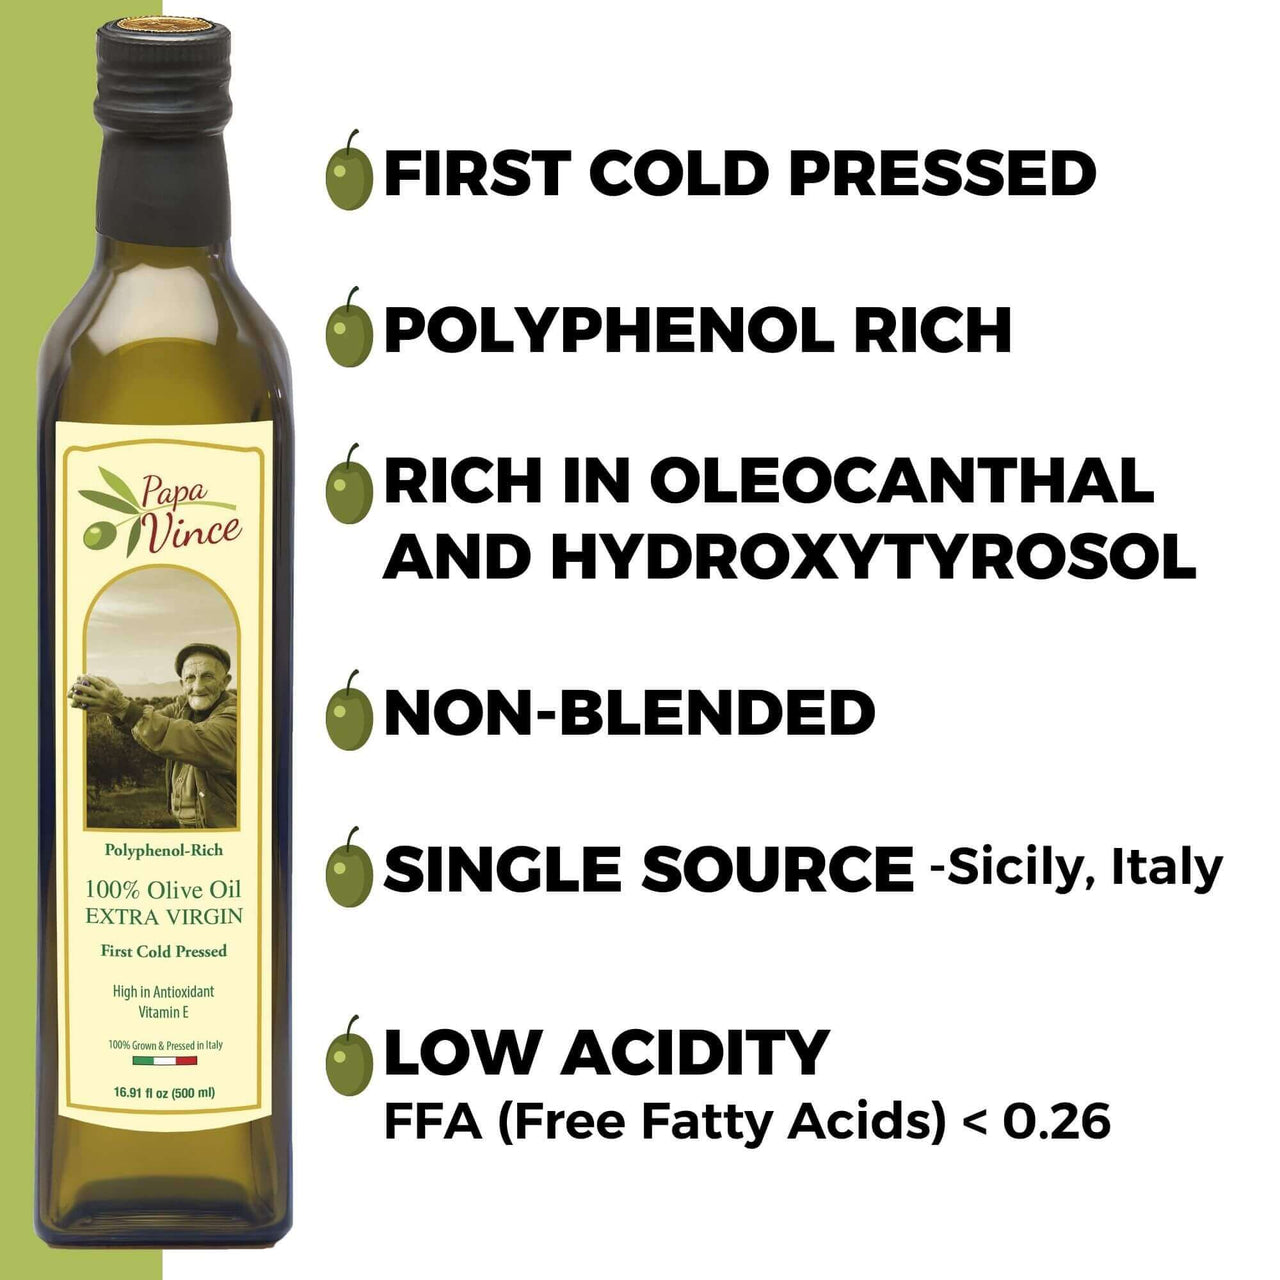 Papa Vince Olive Oil Extra Virgin Gift - Unblended, Family Harvest 2022/23, High in Polyphenols, Single Estate, First Cold Pressed, Sicily, Italy, Peppery Finish, Unfiltered, Unrefined, Green Bag - Papa Vince